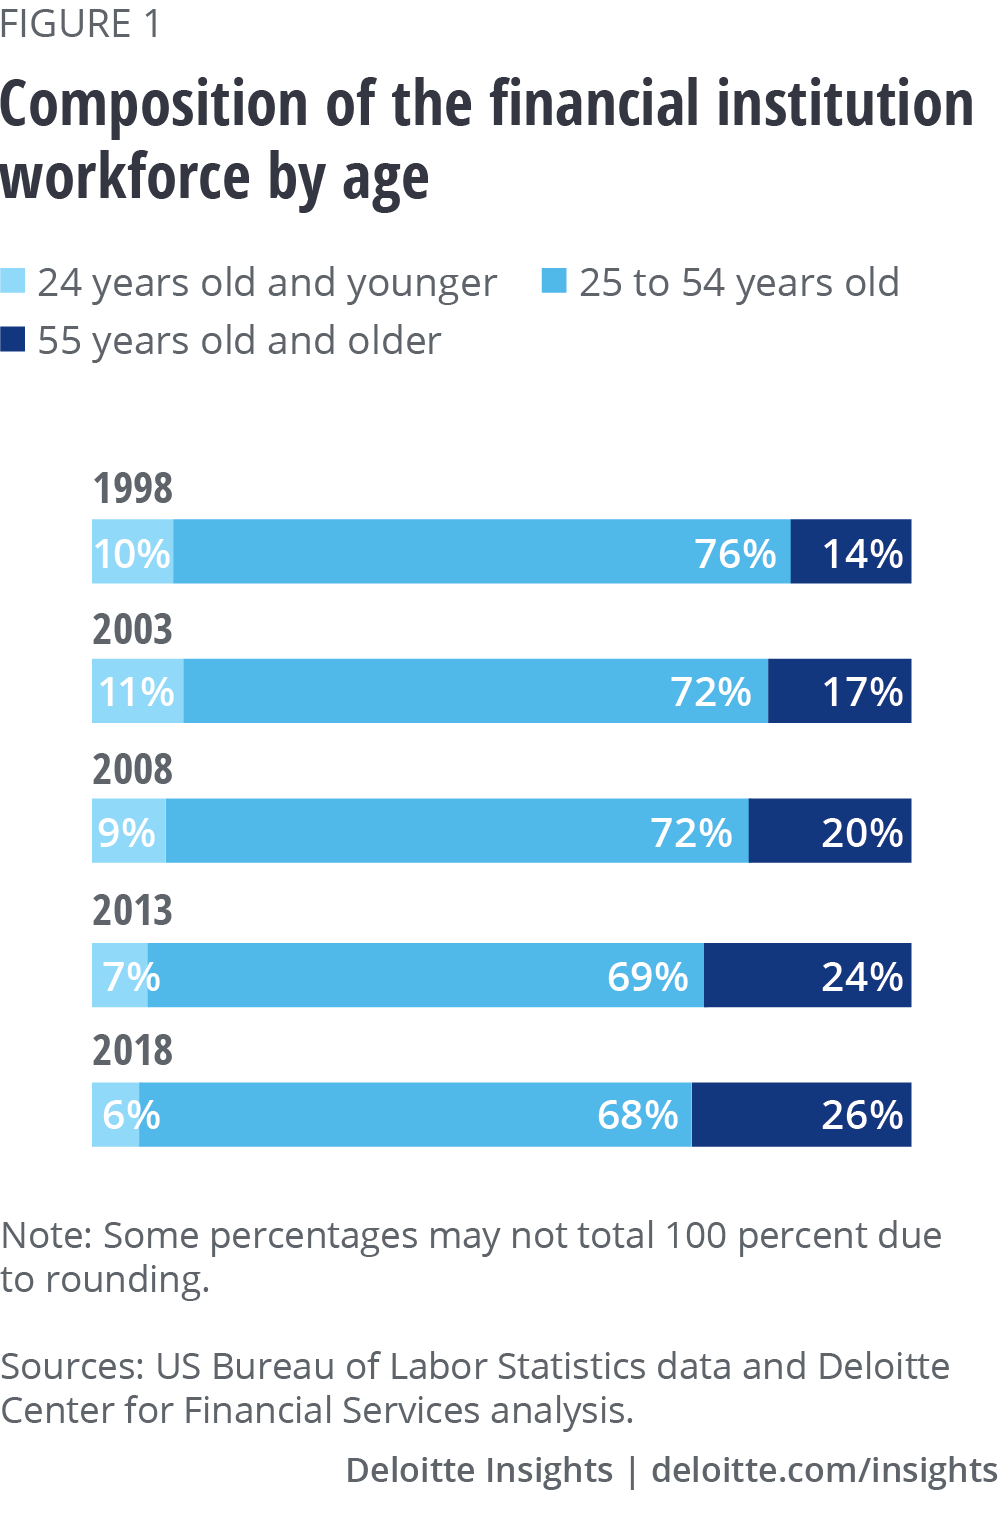 Composition of the financial institution workforce by age